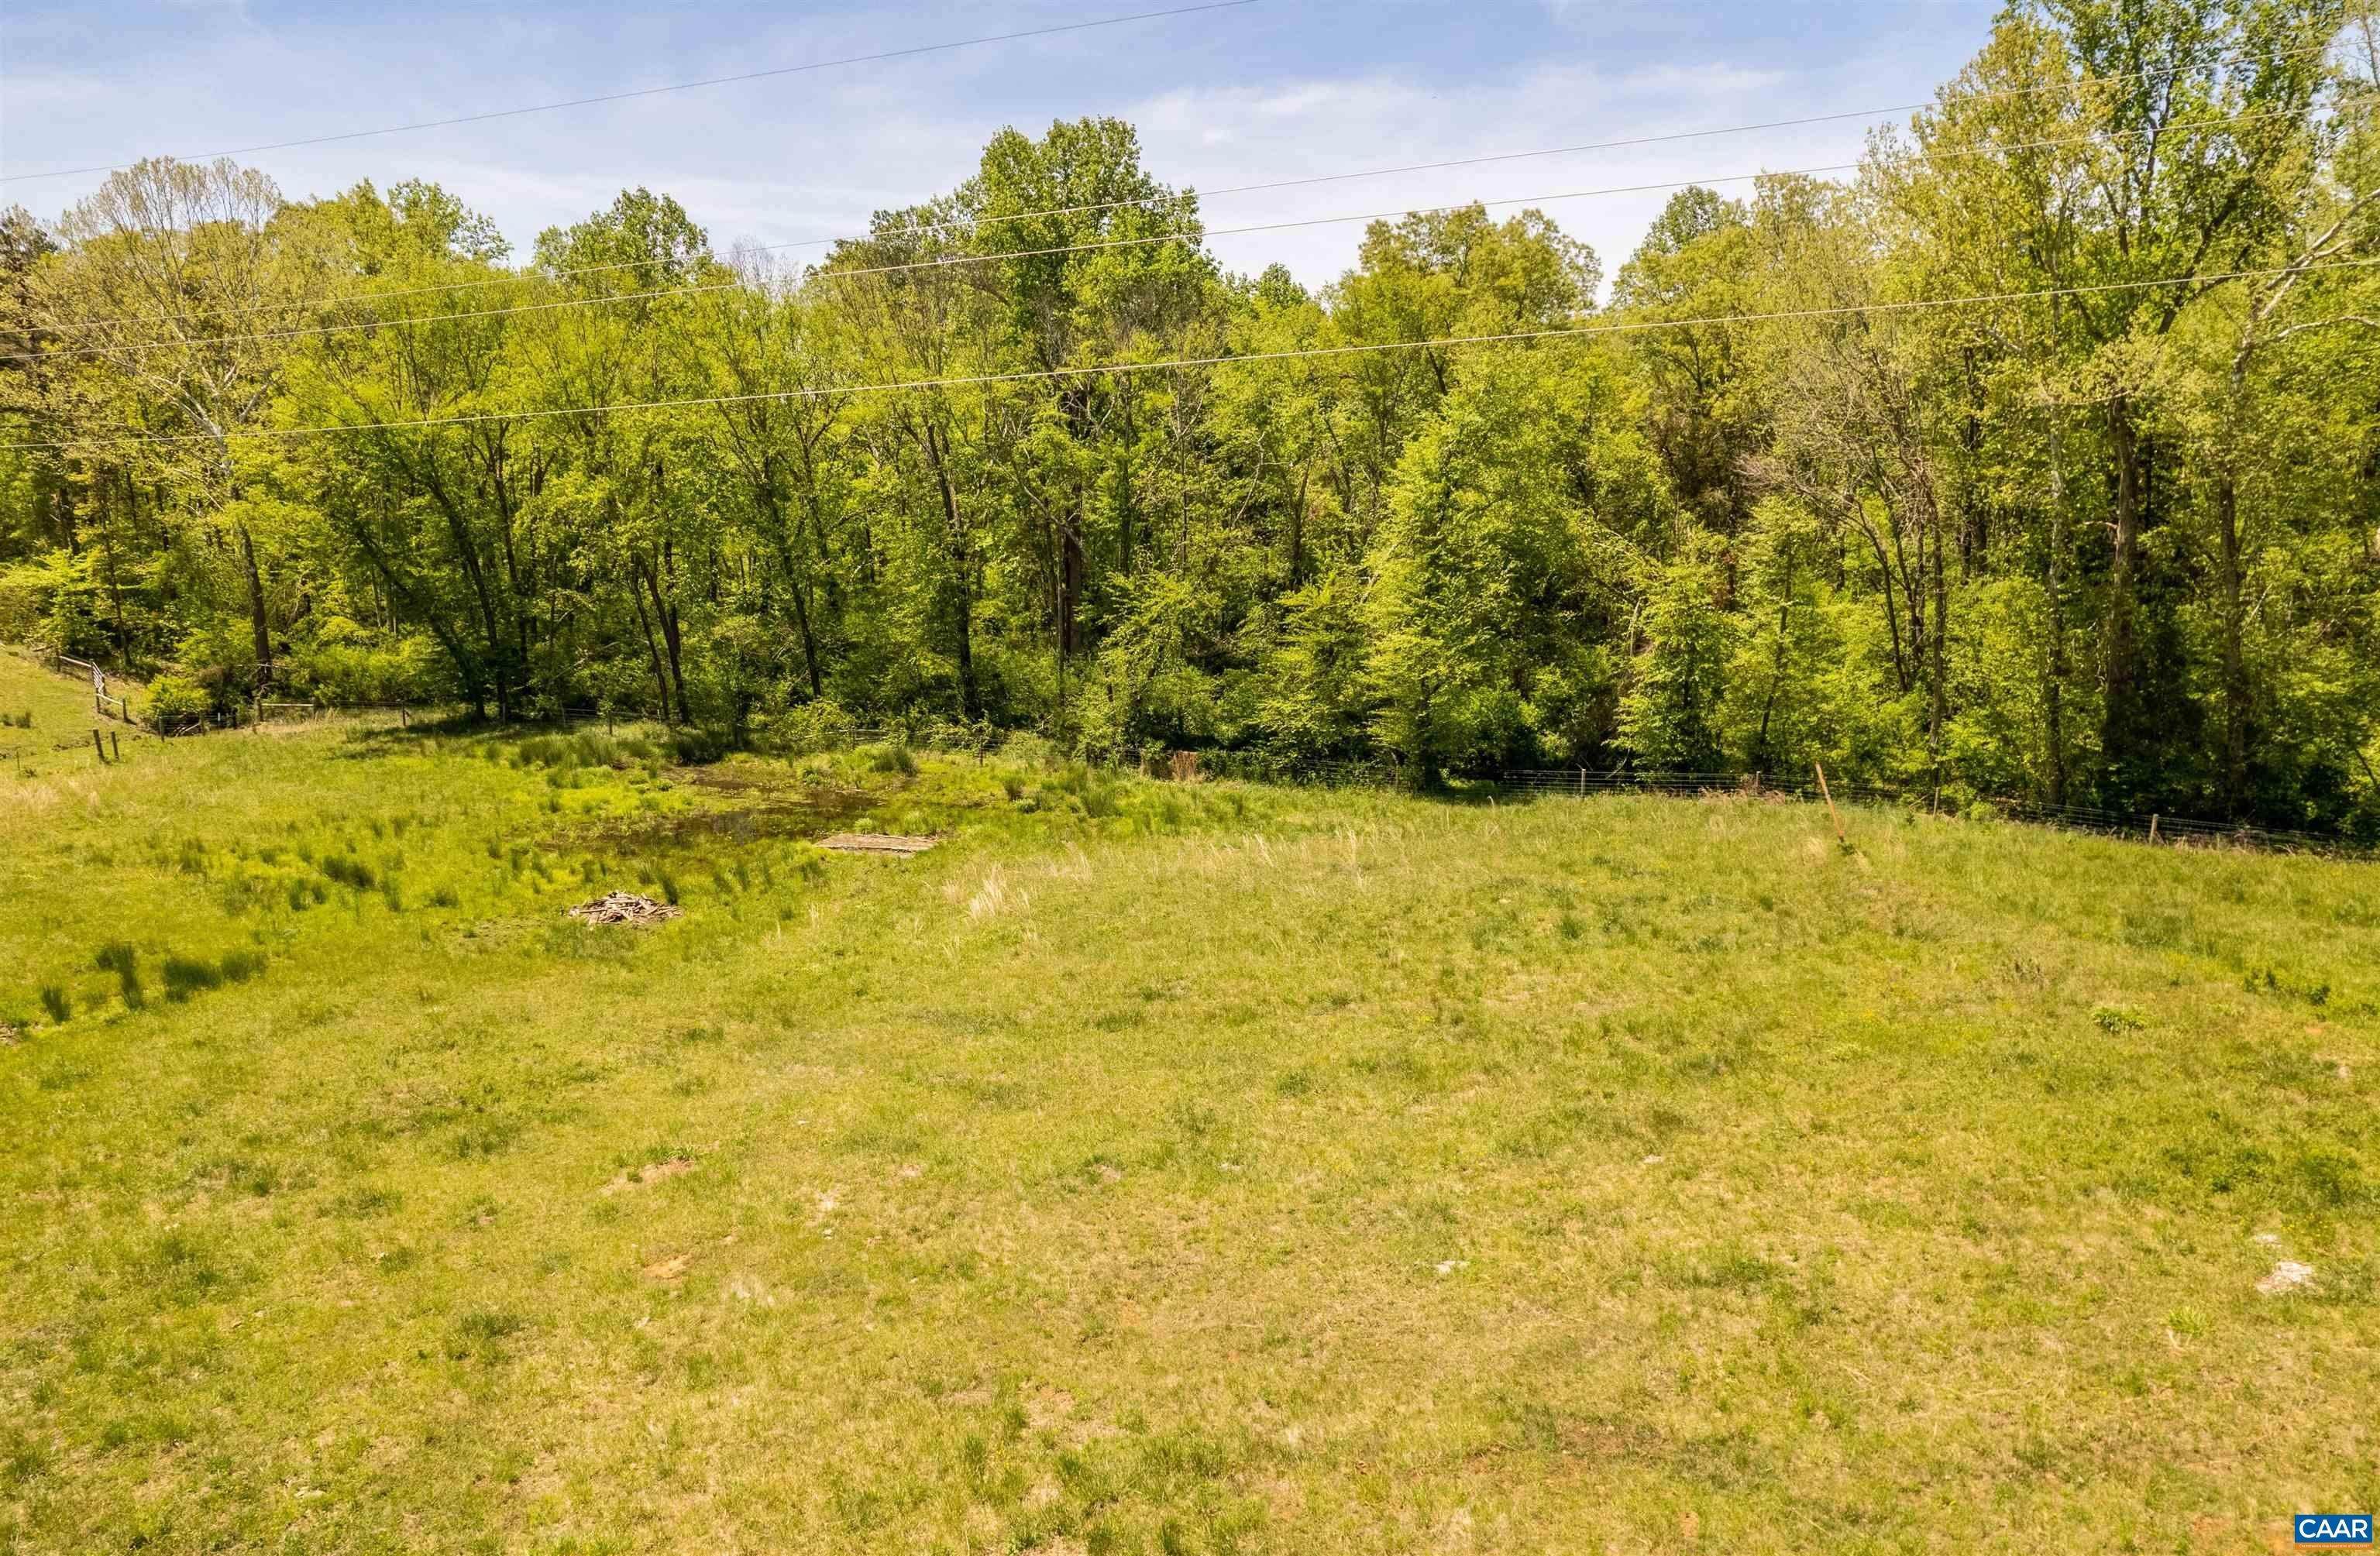 20. Land for Sale at Tax Map 34 3 A COVERED BRIDGE Road Kents Store, Virginia 23084 United States